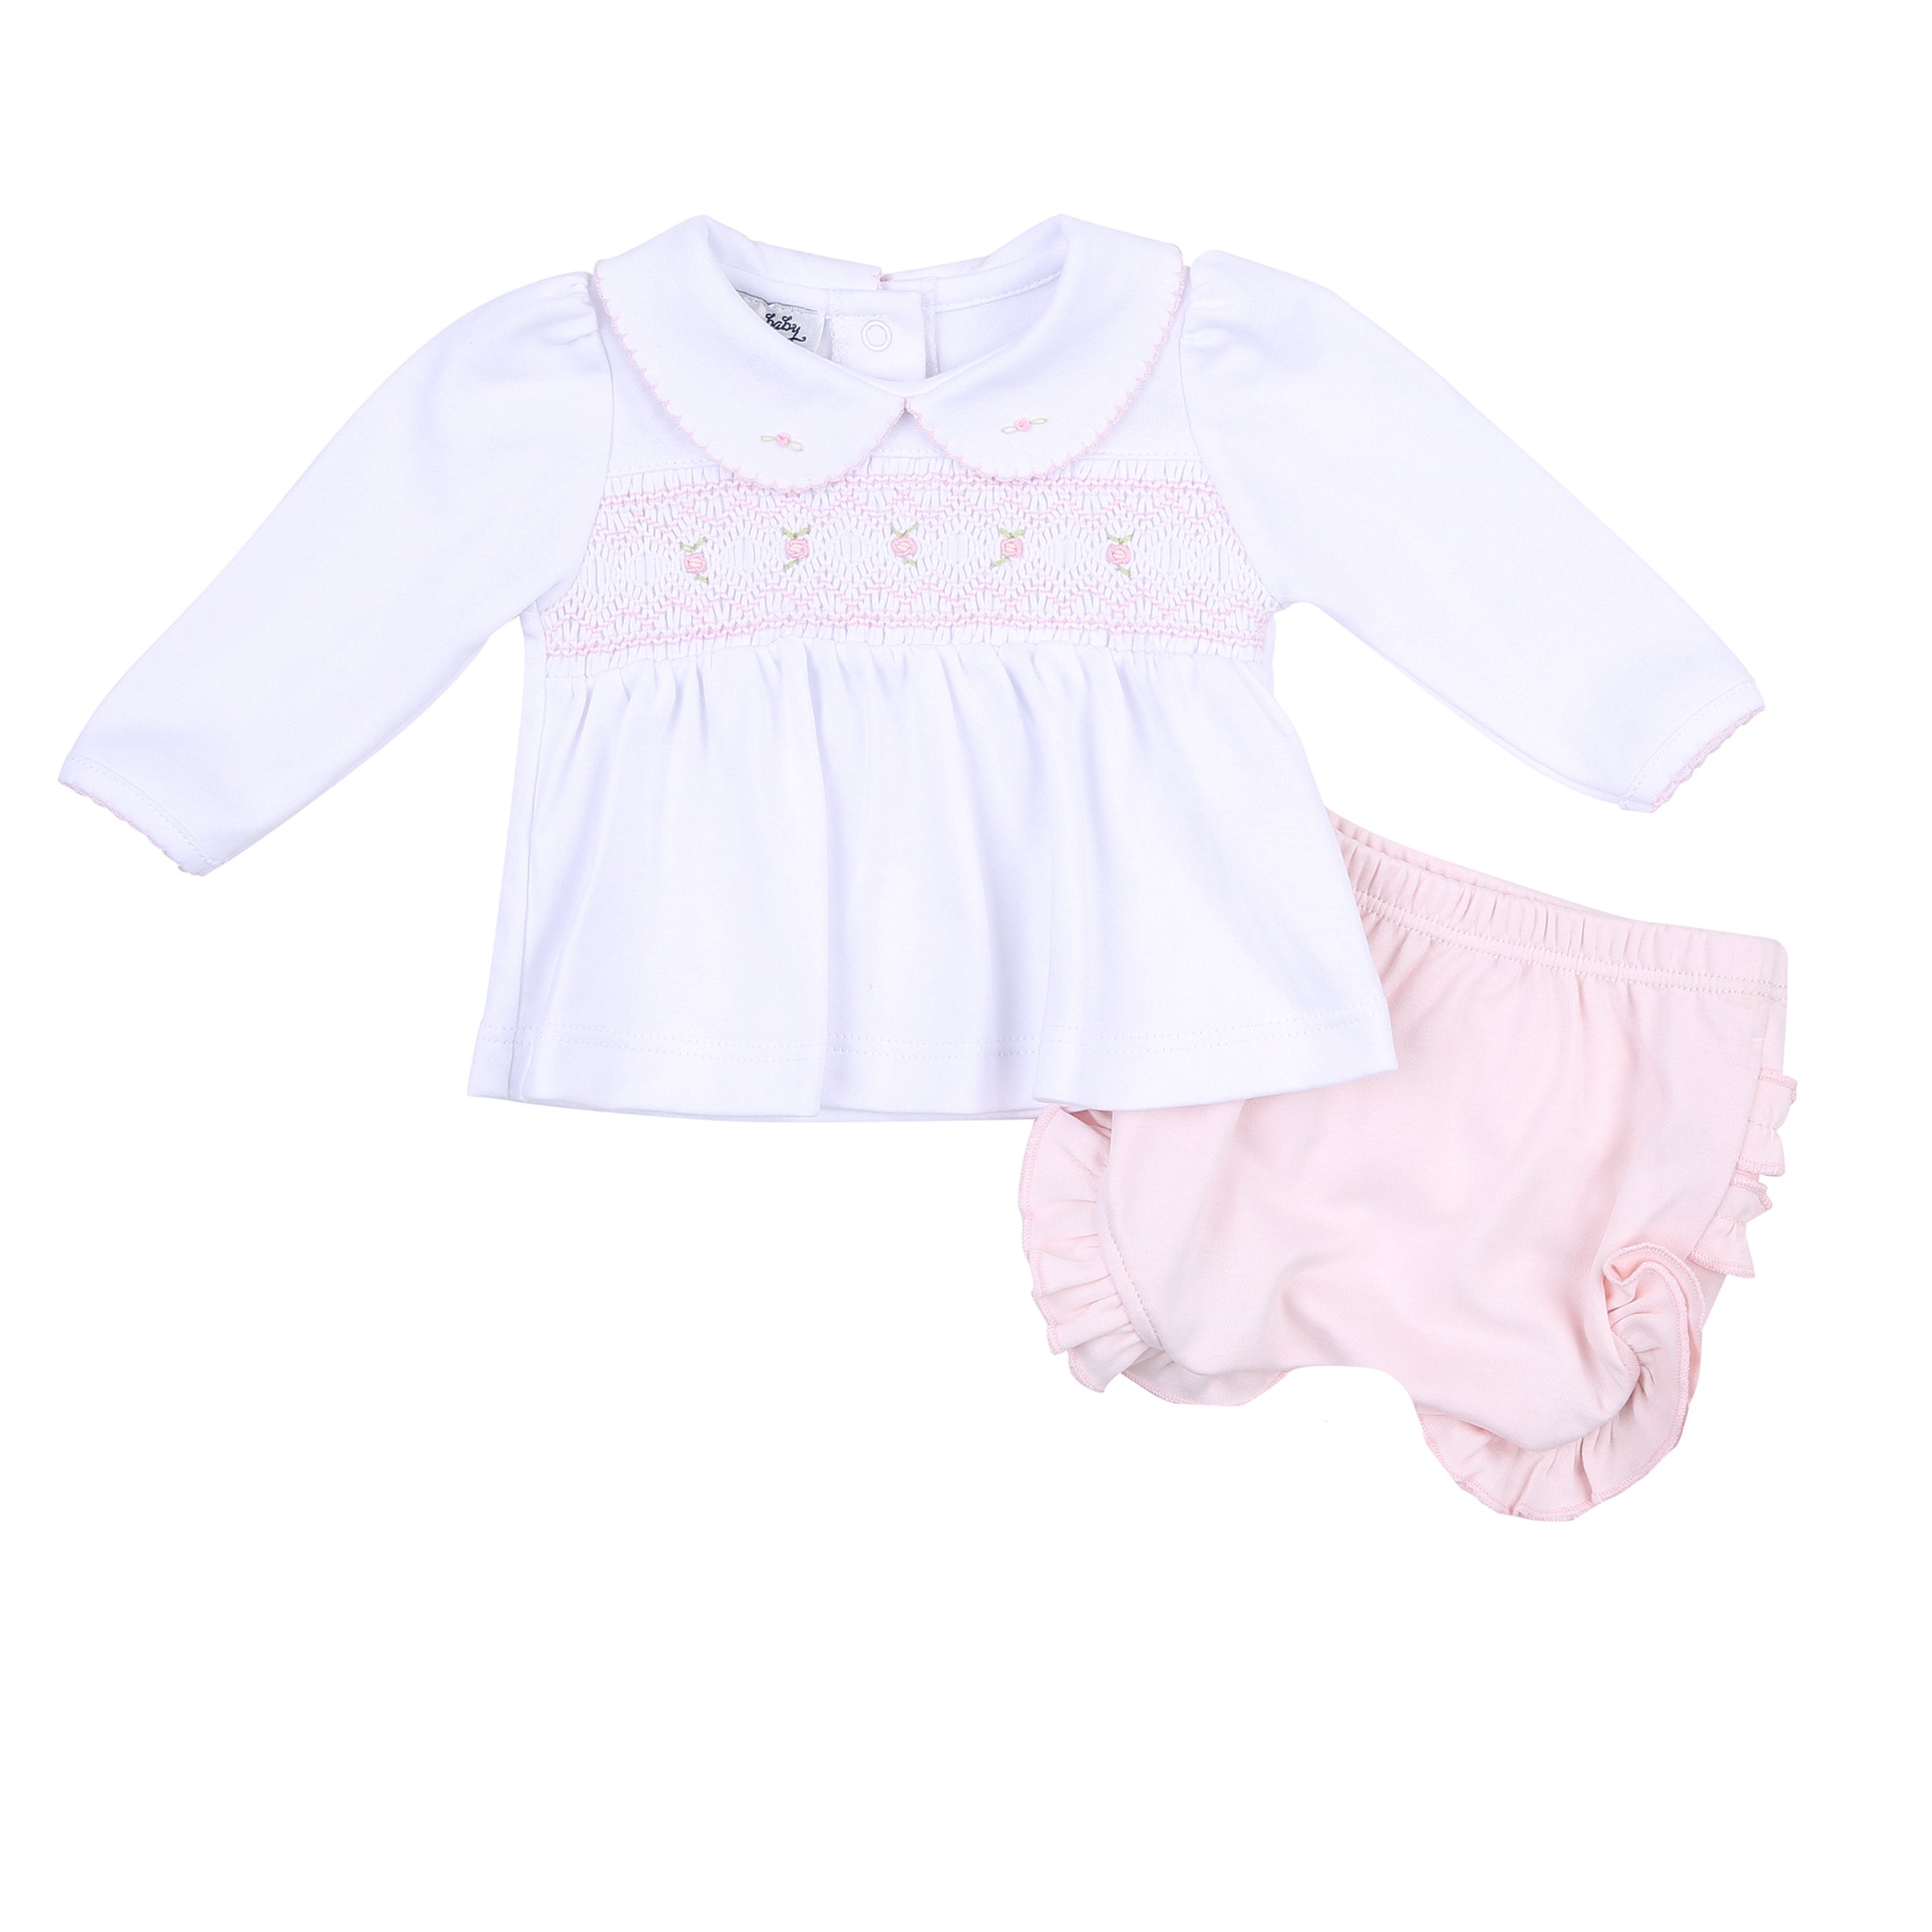 Fiona & Phillip Smocked Diaper Cover Set - Pink